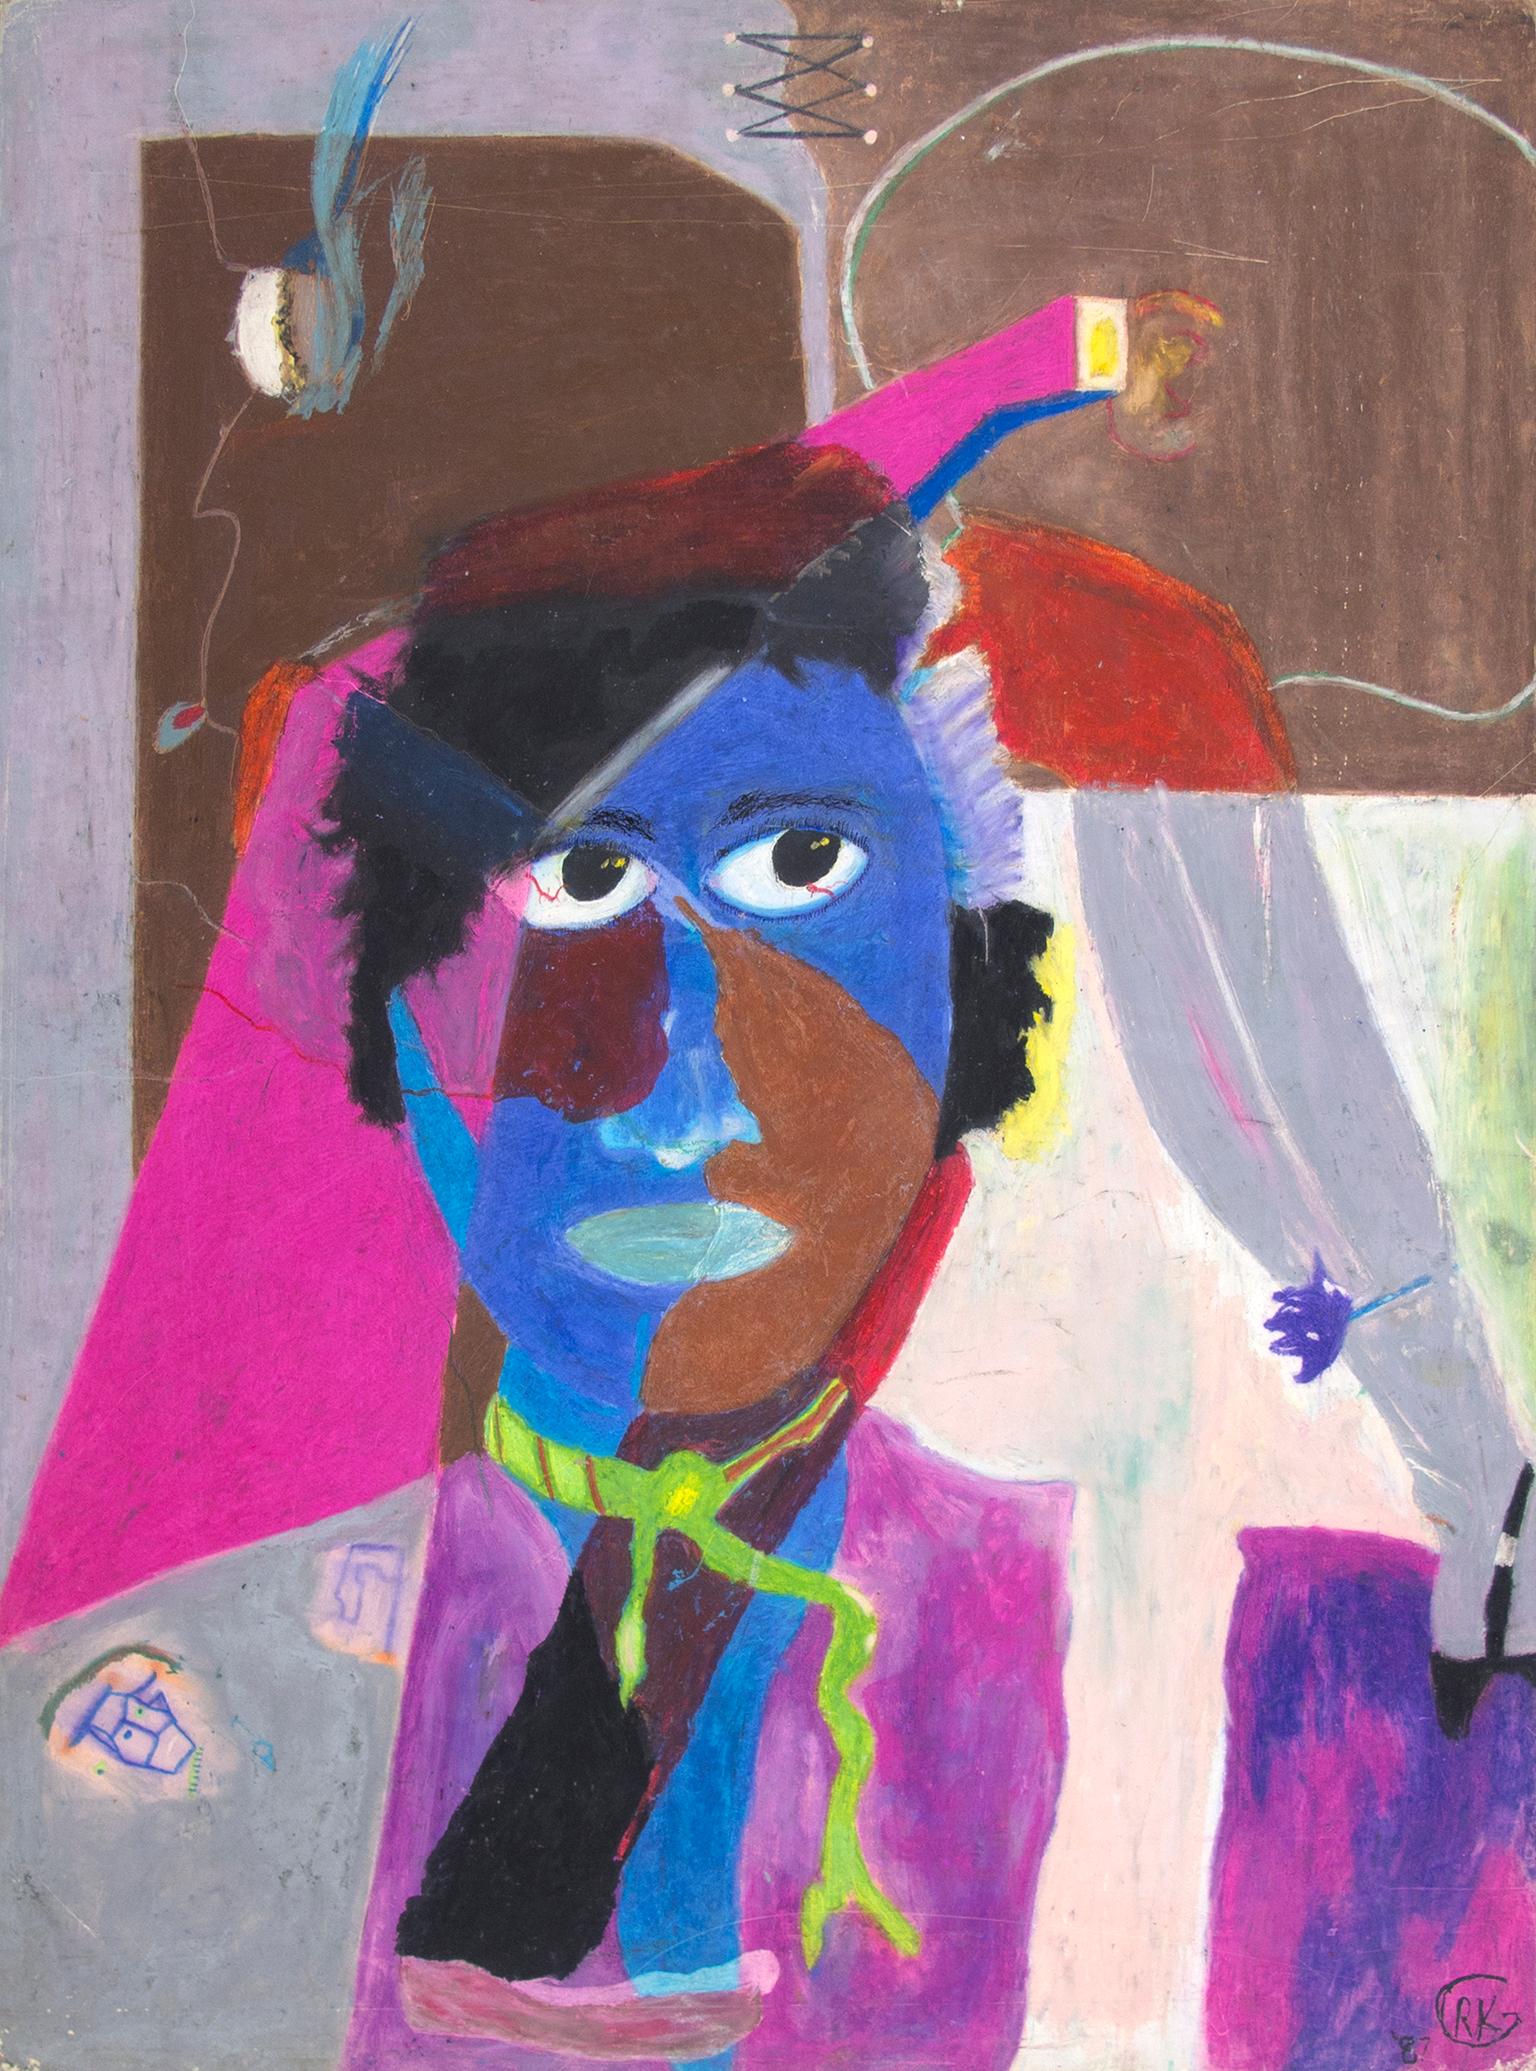 "The Sound of Color" is an original oil pastel drawing on illustration board by Reginald K. Gee. The artist initialed the piece lower right. This piece features an abstract figure in pink, purple, and blue in front of a brown and gray background.